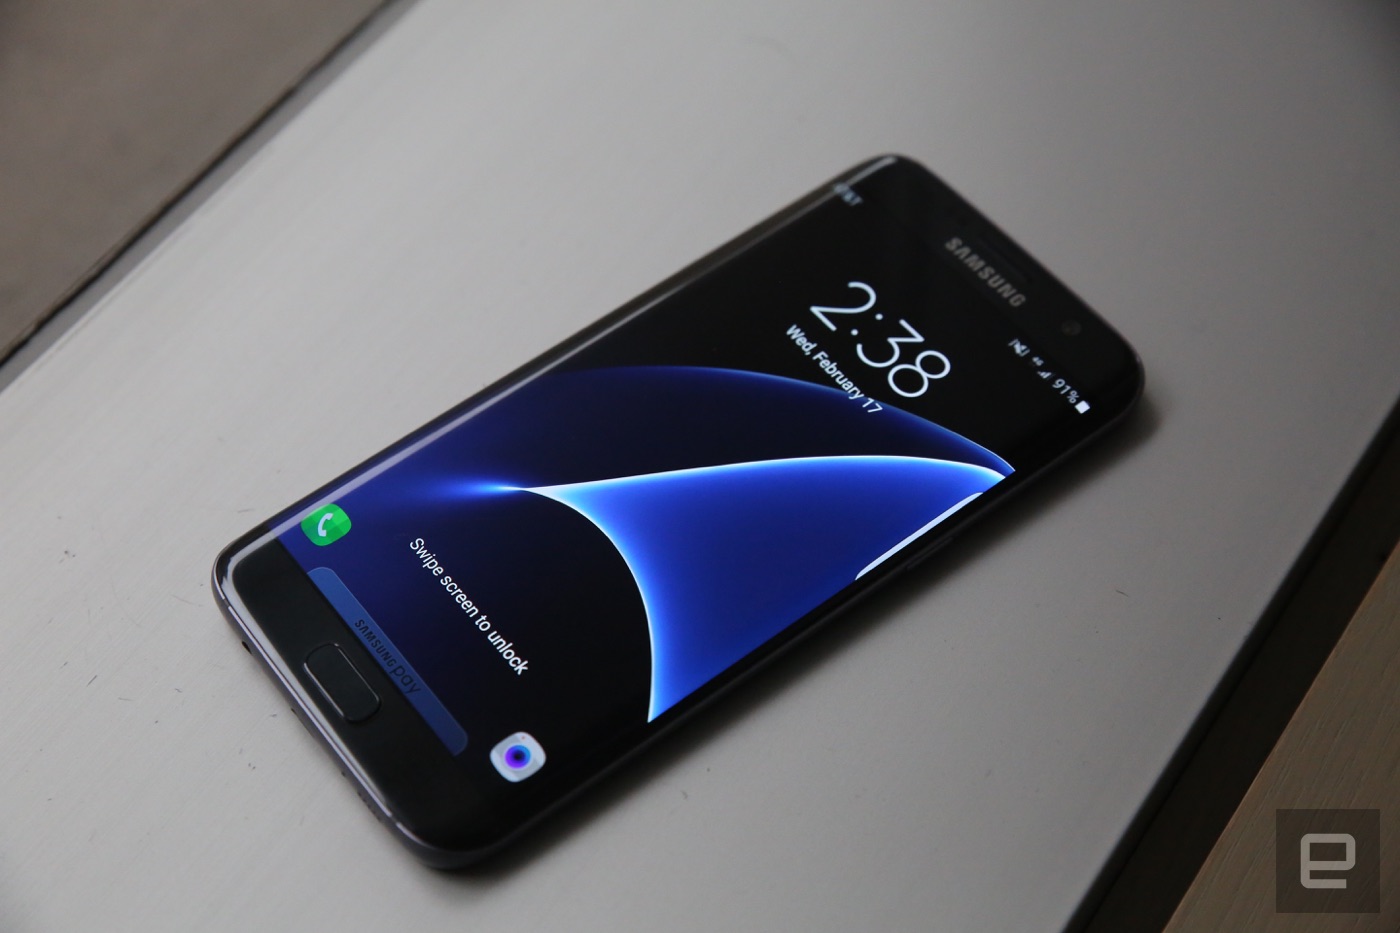 The Galaxy S7 And S7 Edge Are Beautiful If Unsurprising Sequels